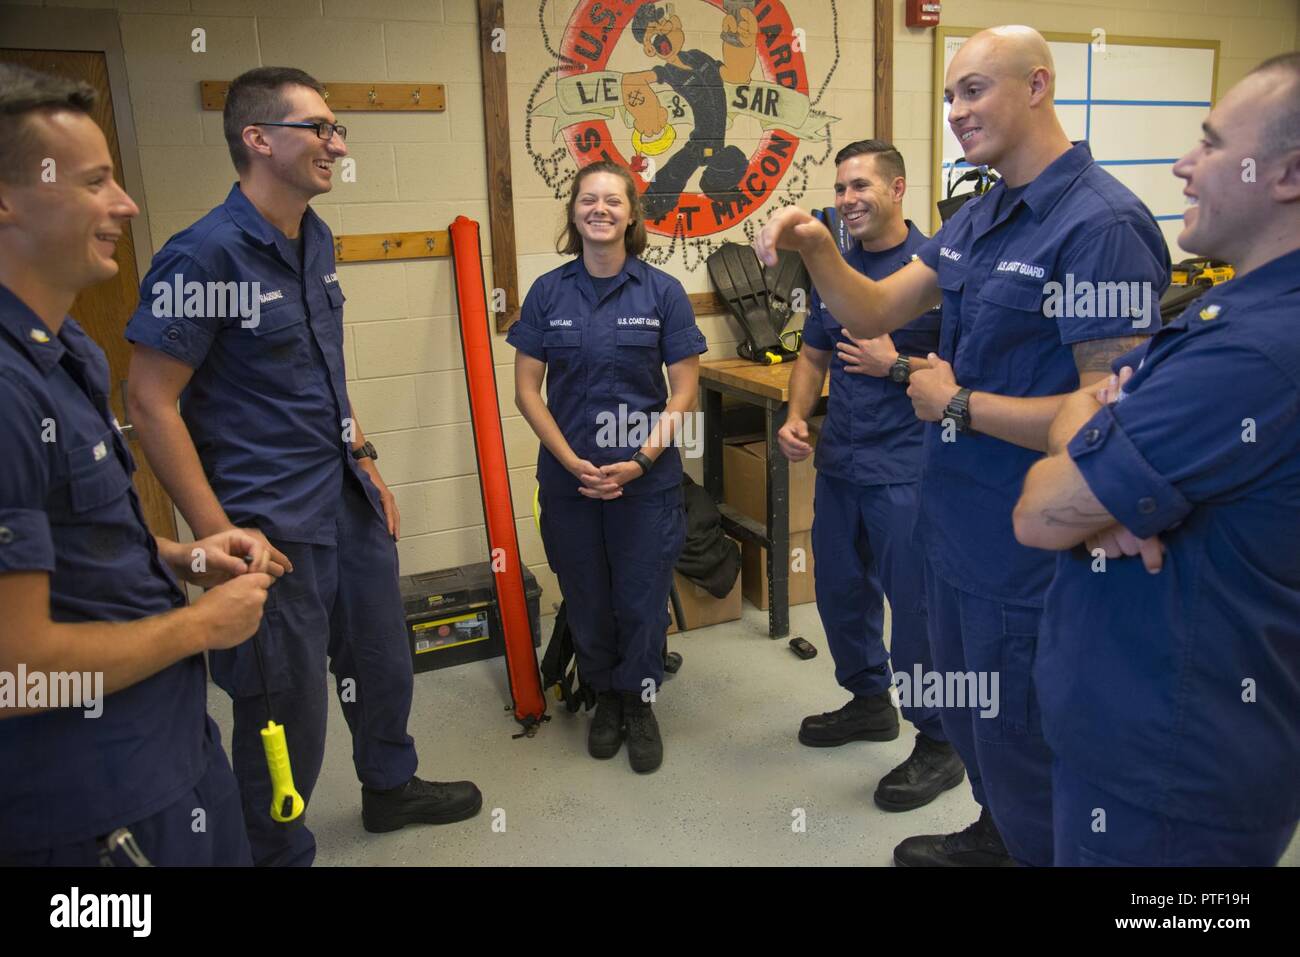 Petty Officer 3rd Class Michael Sparks (left to right), Fireman Samuel Ragsdale, Fireman Jordan Markland, Petty Officer 2nd Class Tyler McGregor, Seaman Crewe Goralski and Petty Officer 2nd Class Zane Hutson reunite at Station Fort Macon, North Carolina, July 10, 2017. Sparks and Ragsdale were rescued by the others July 6 after a diving incident where the two were stranded and clung to the orange safety sausage (seen center) to stay together. Stock Photo